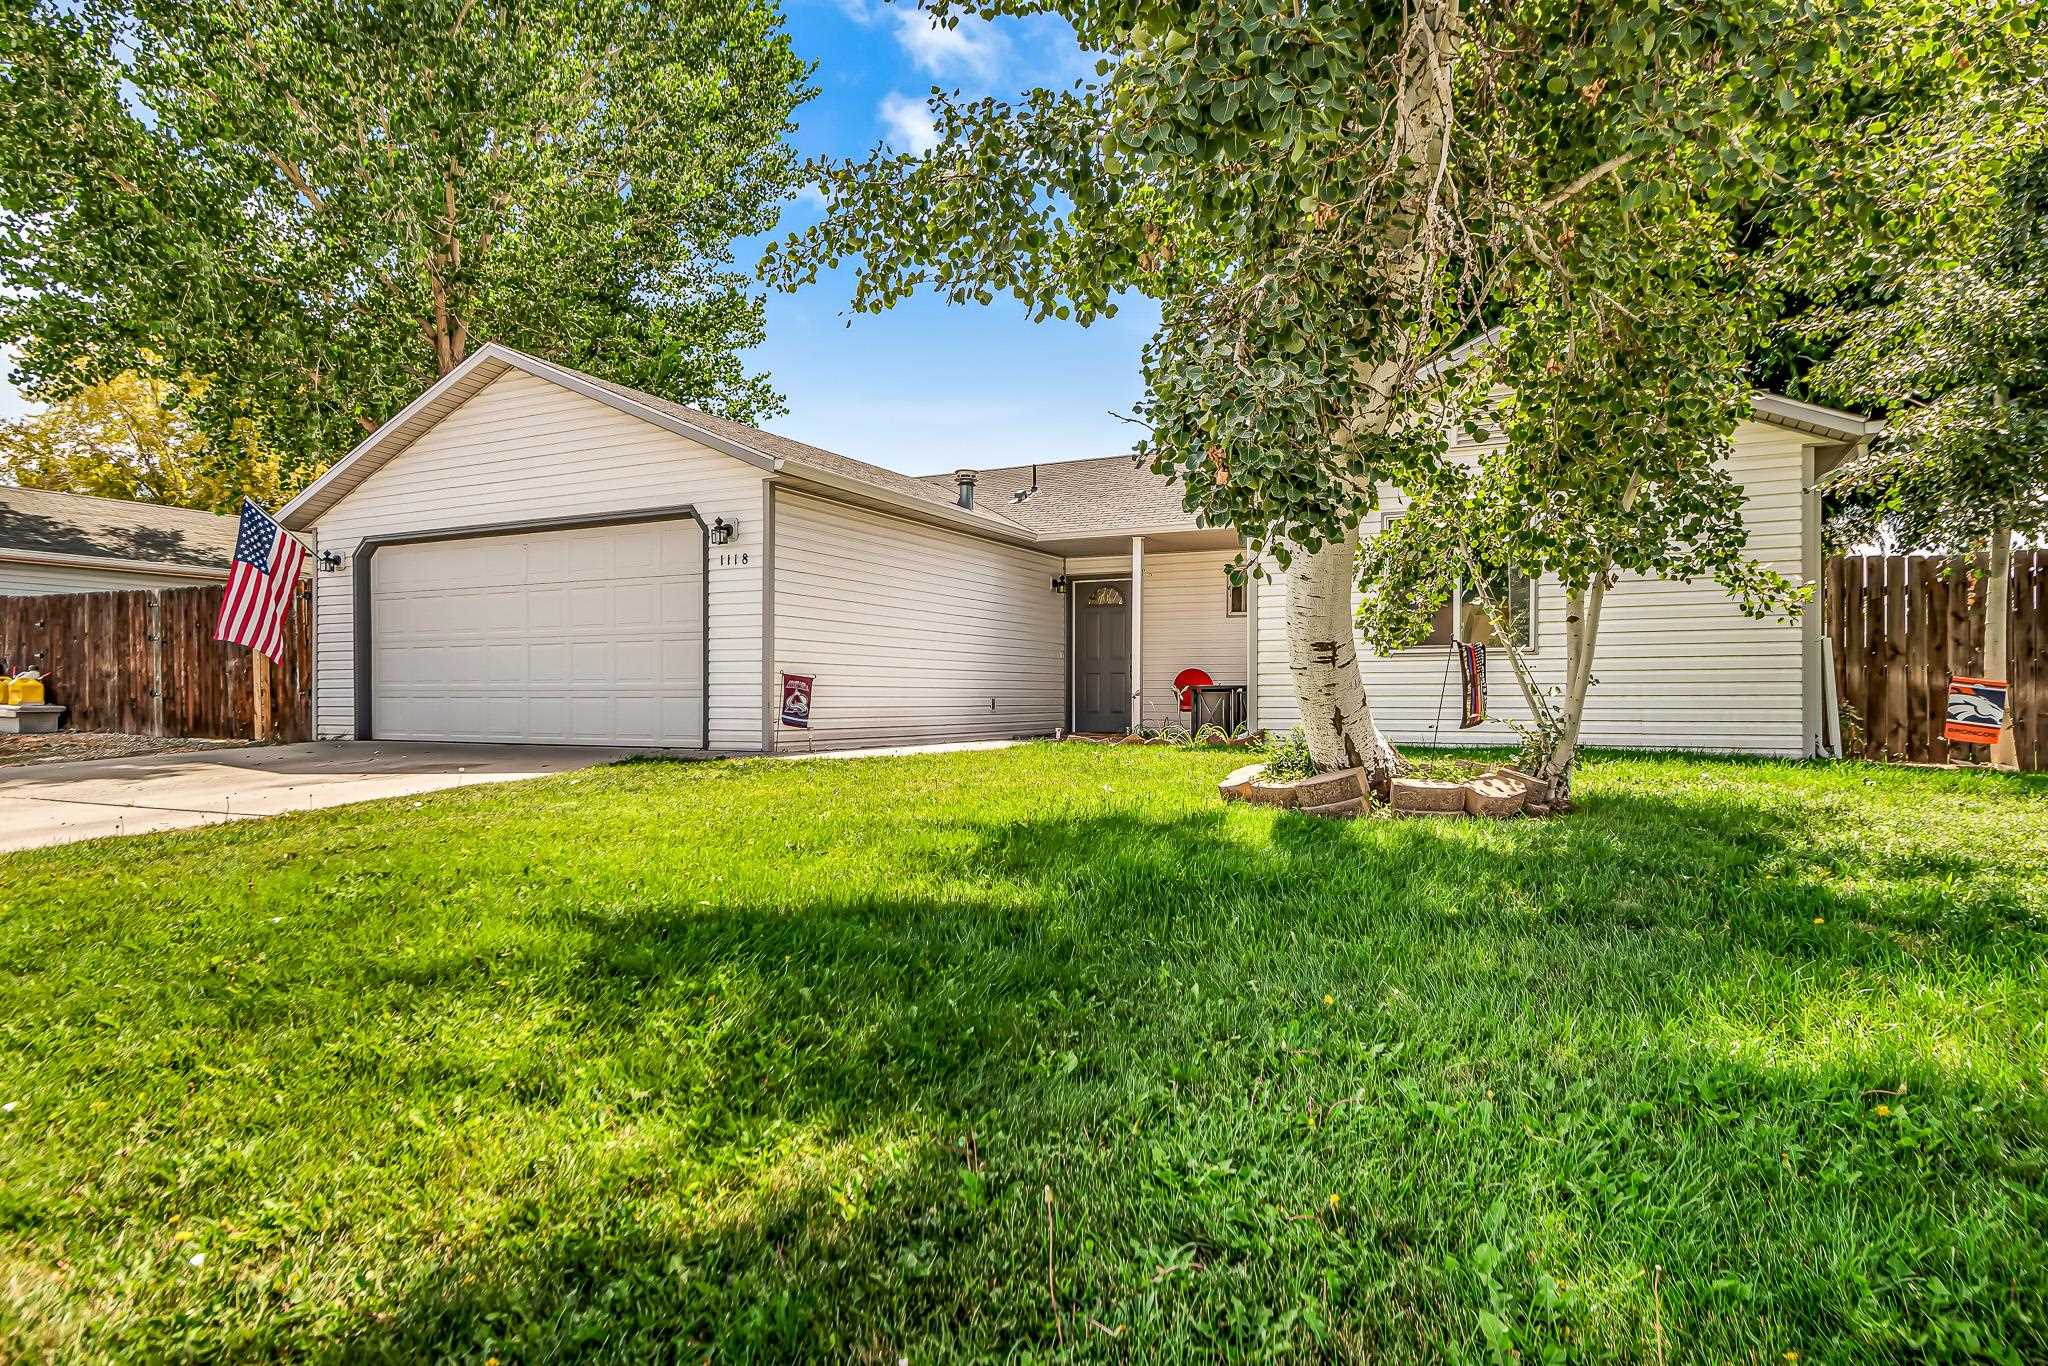 Imagine enjoying your morning coffee from the serene setting of the backyard or perhaps joining in on one of the neighborhood cornhole games. This beautifully remodeled 3 bed, 2 bath home in Fruita is directly across from Salt Wash Park and Fields and blocks away from the new Monument Ridge Elementary School. This charming home has been fully updated throughout, new evaporative cooling system, updated counter tops, a beautiful yard and a covered back patio. Friendly neighborhood, close proximity to downtown and the desert, RV parking, shed and so much more! Irrigation water provided through HOA. Truly enjoy quiet suburb living in one of the friendliest neighborhoods in the Valley! This one will go quickly! Schedule your private showing asap!